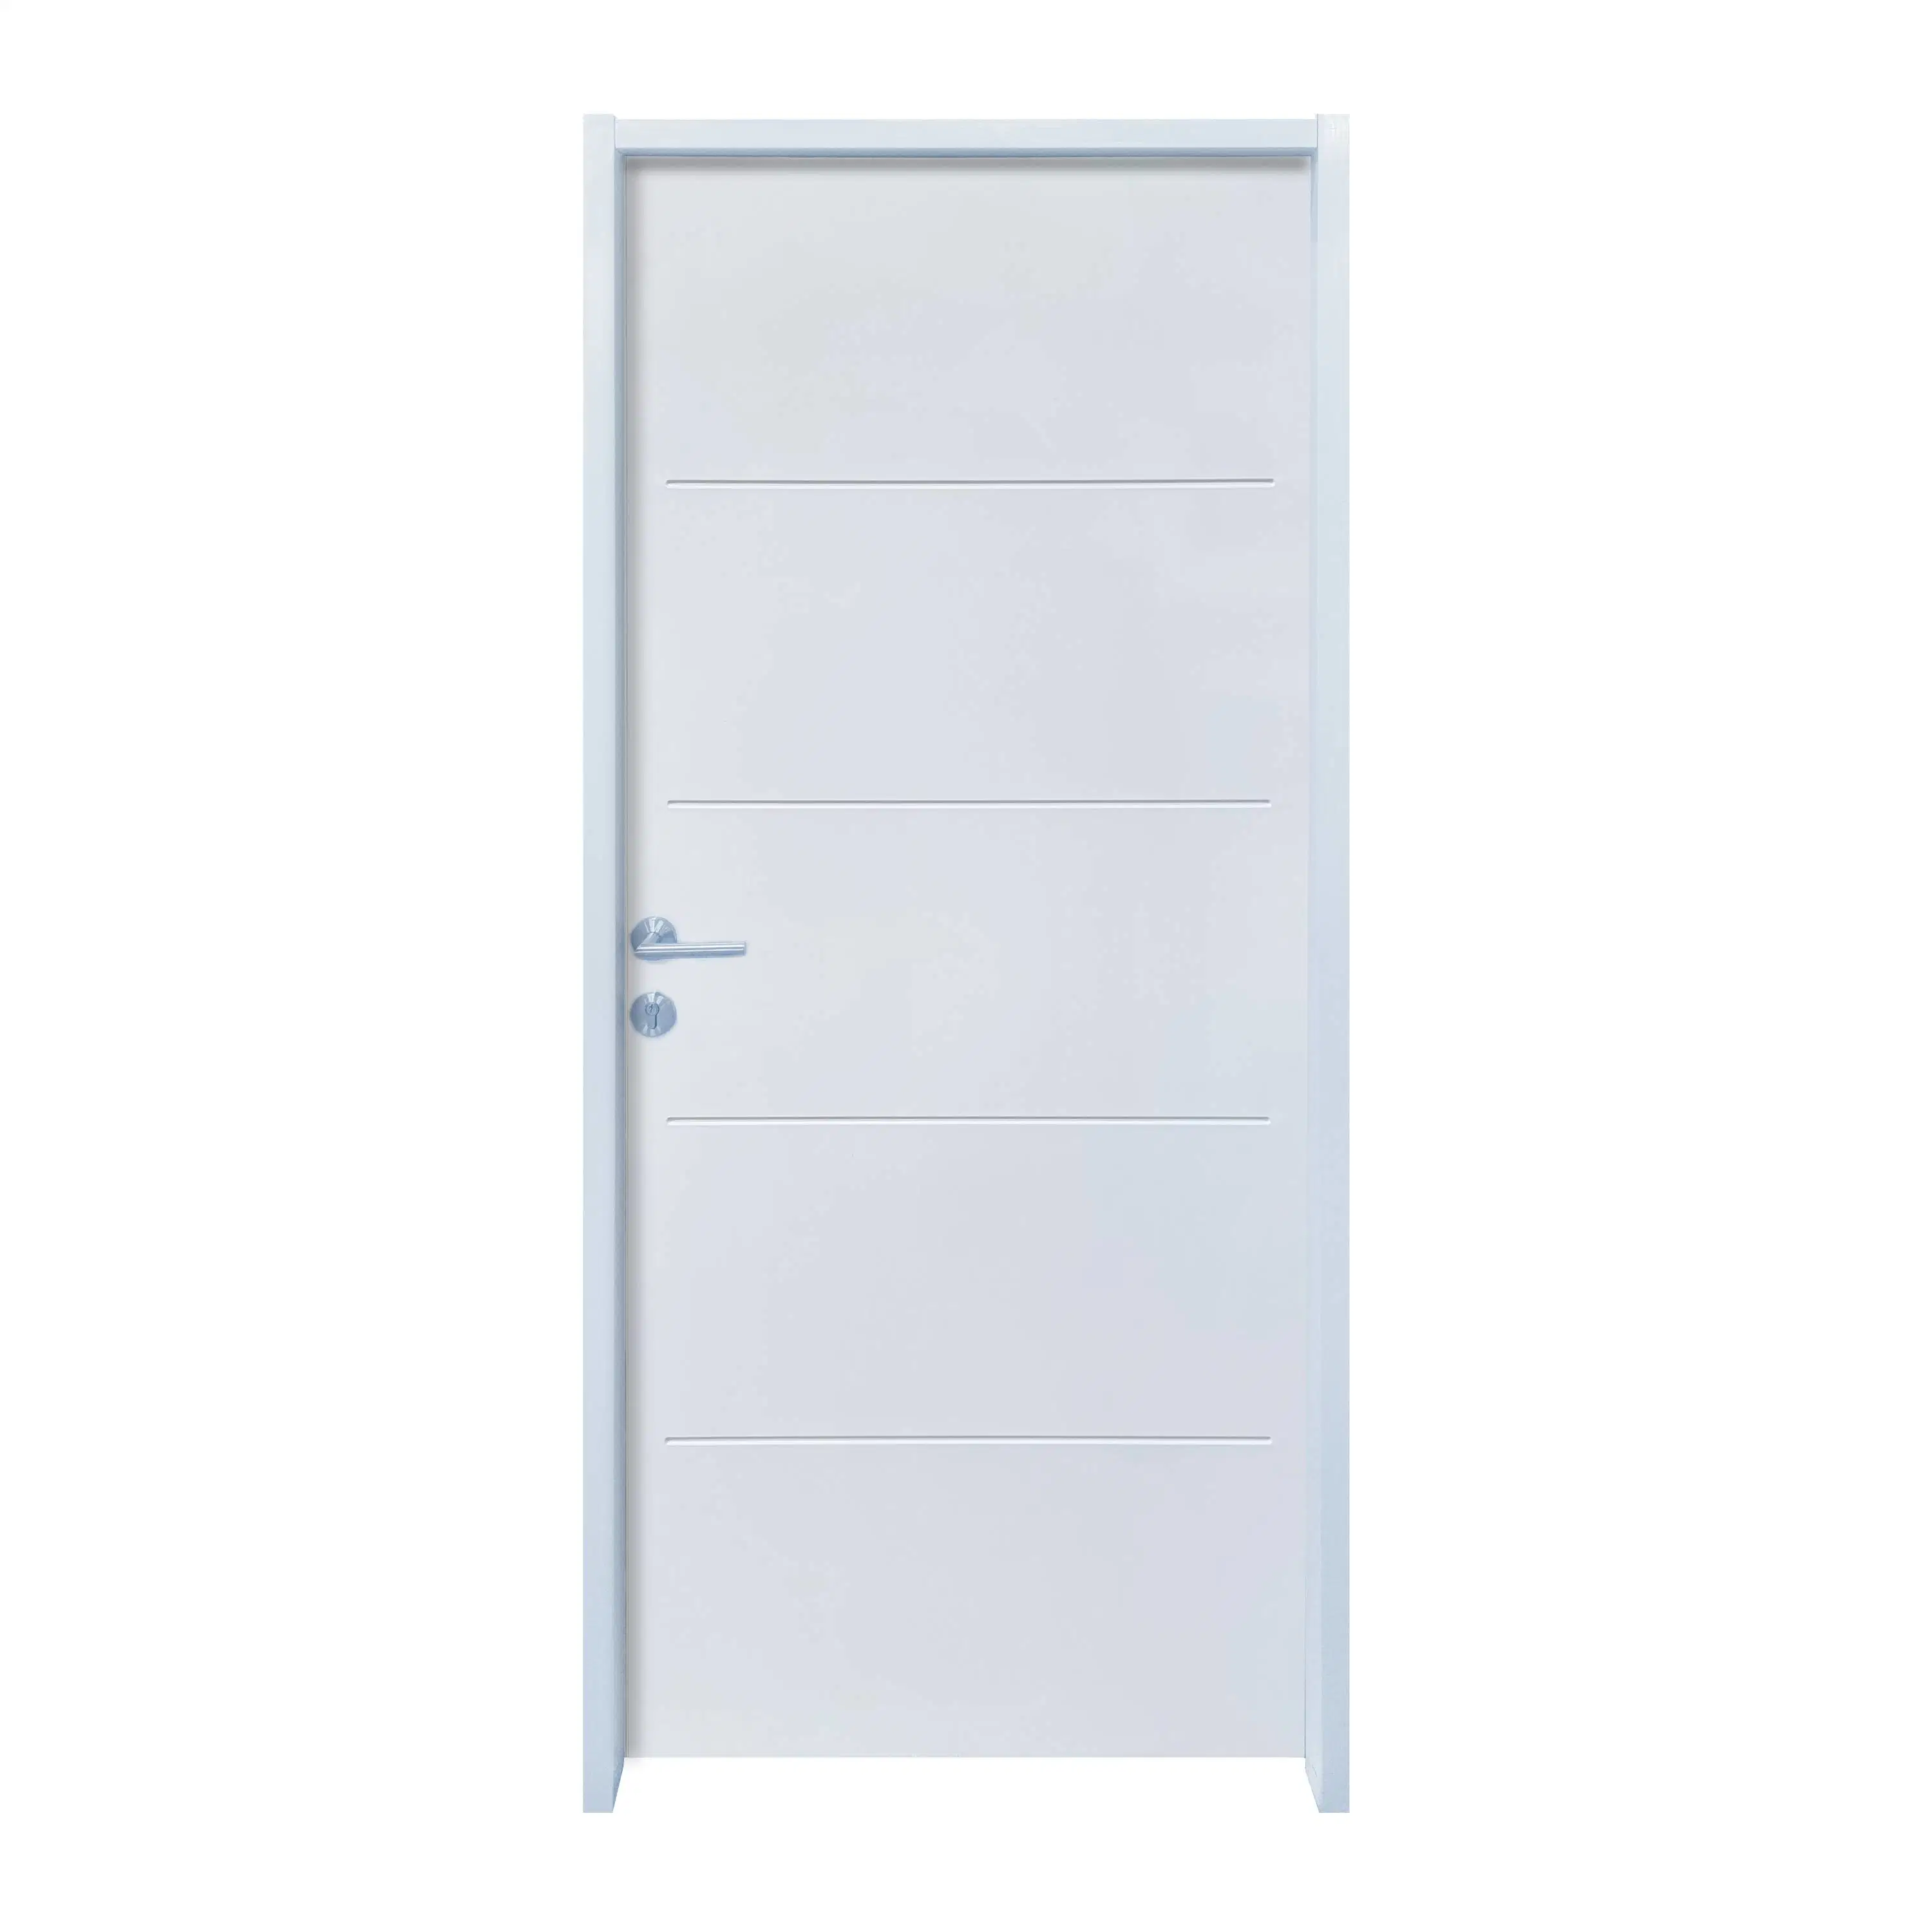 New Modern Italy Design Hot Sale Metal Other Front Entry Door Cheap Price Exterior Steel Security Doors for Houses